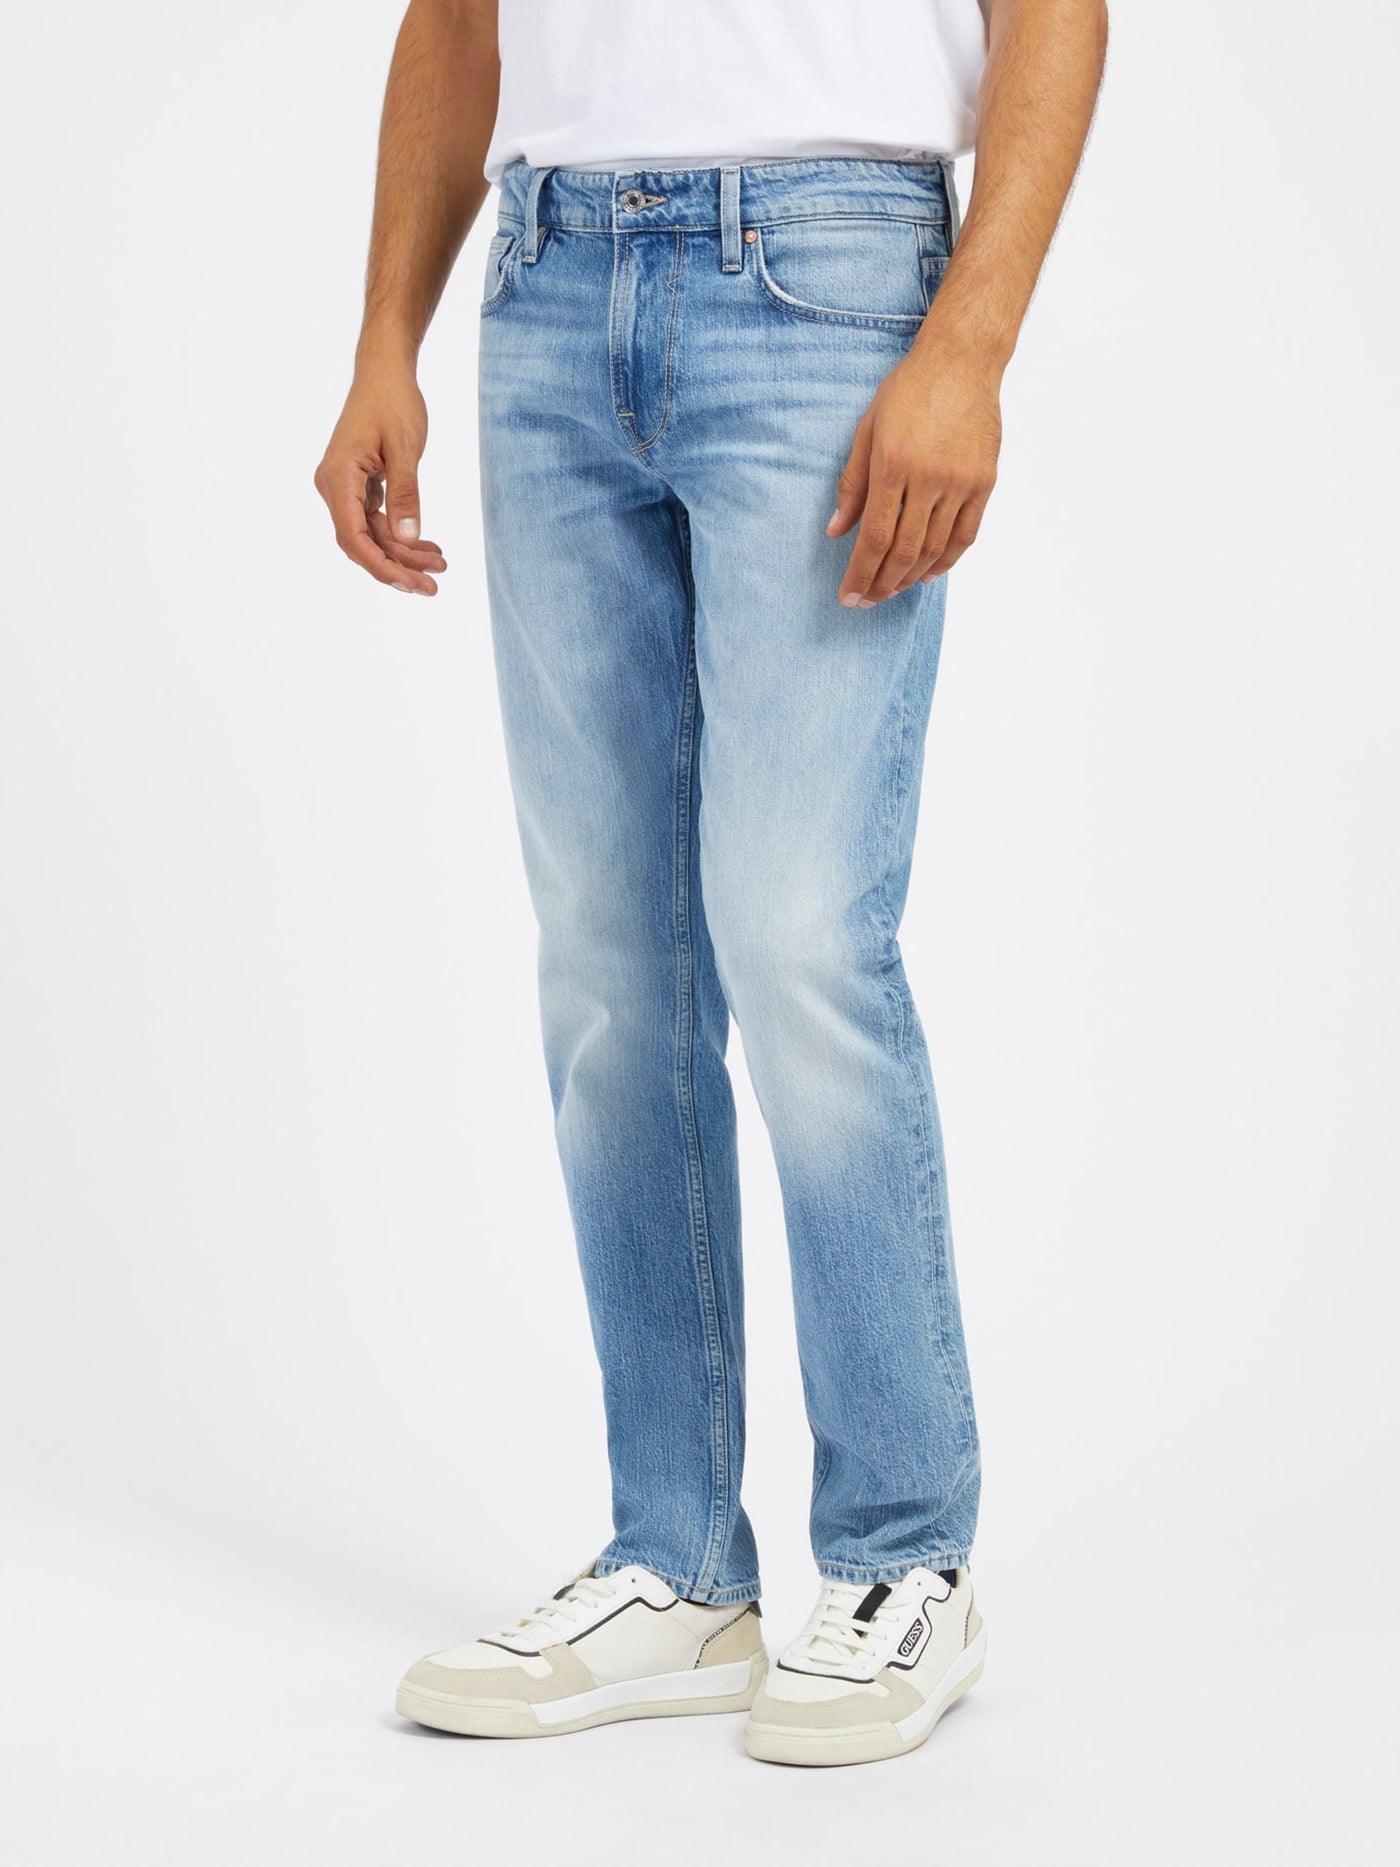 Guess - Jeans uomo slim tapered